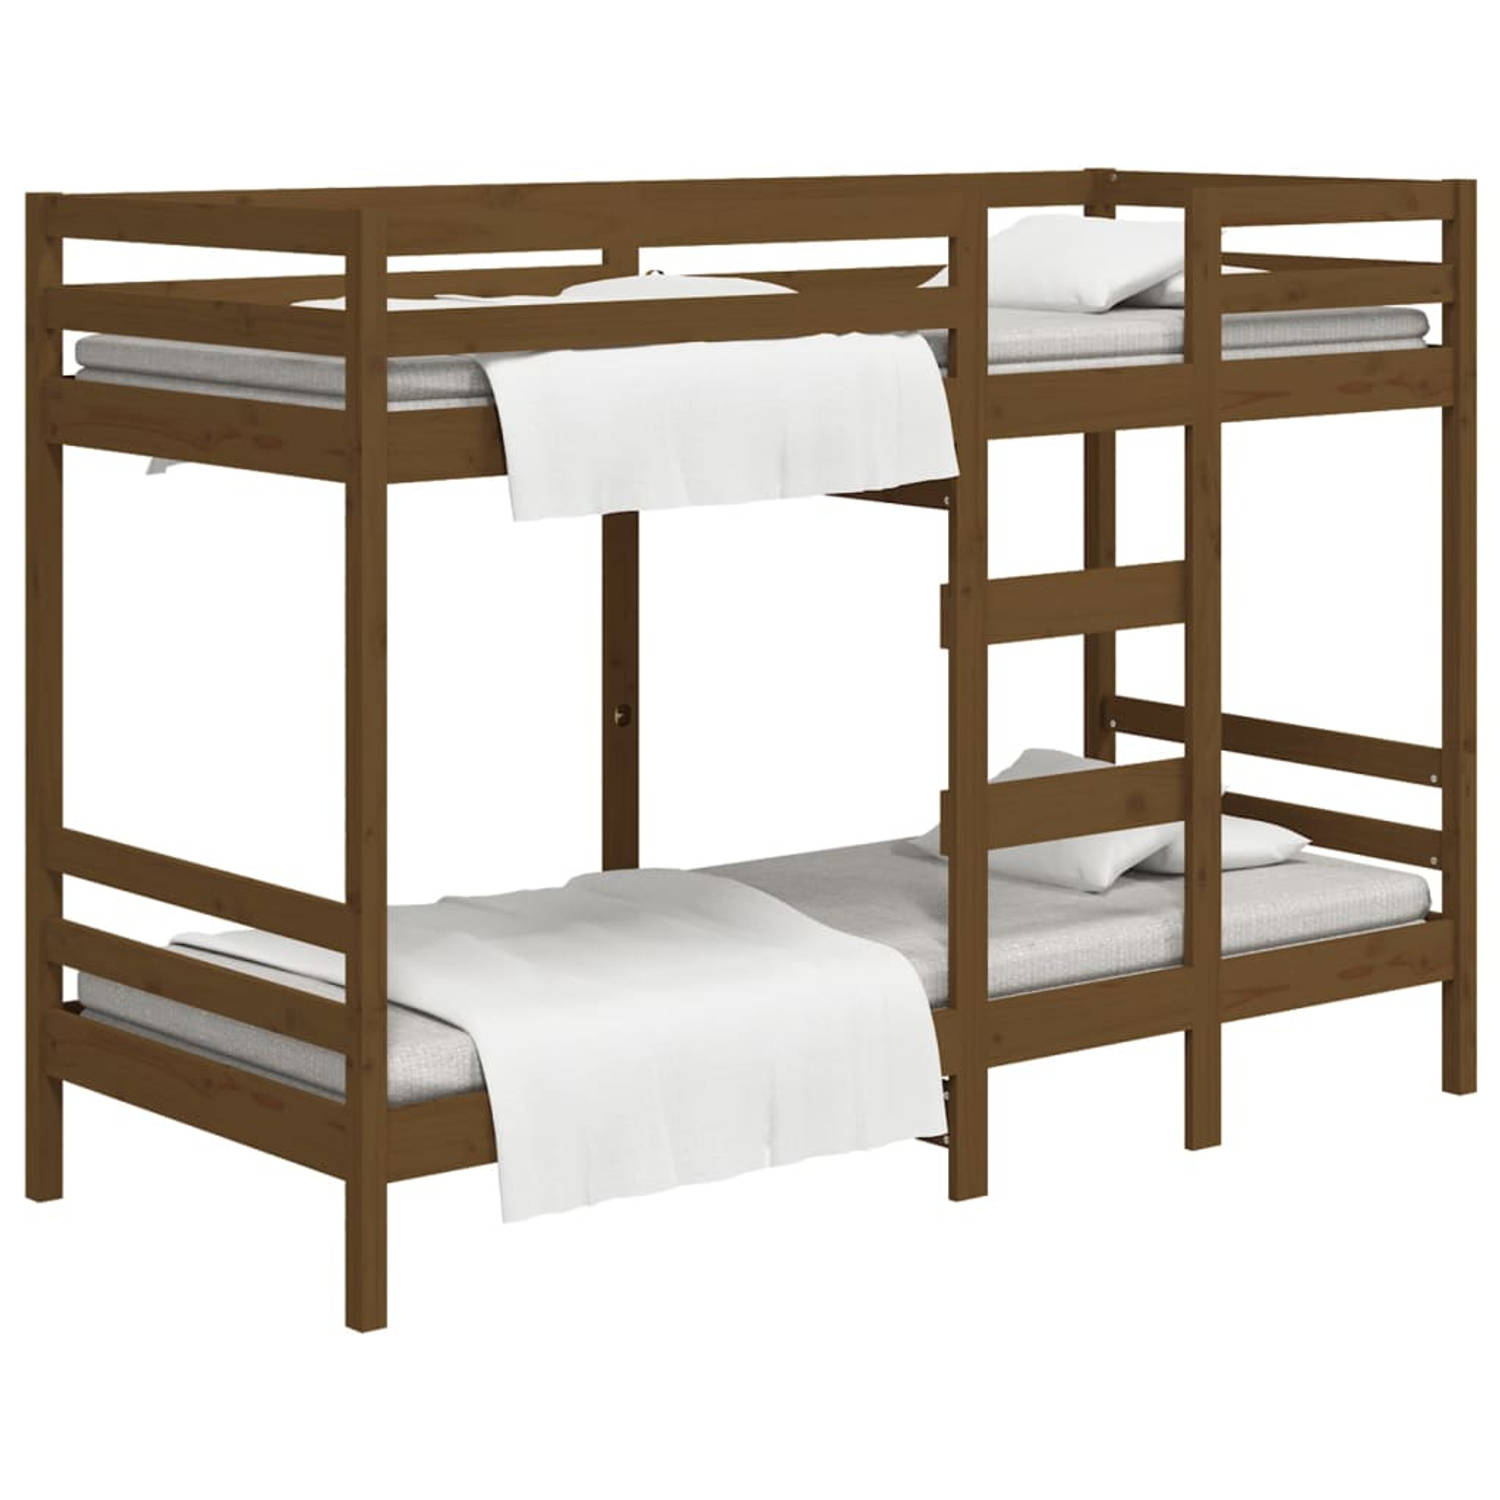 The Living Store Stapelbed massief grenenhout honingbruin 80x200 cm - Bed